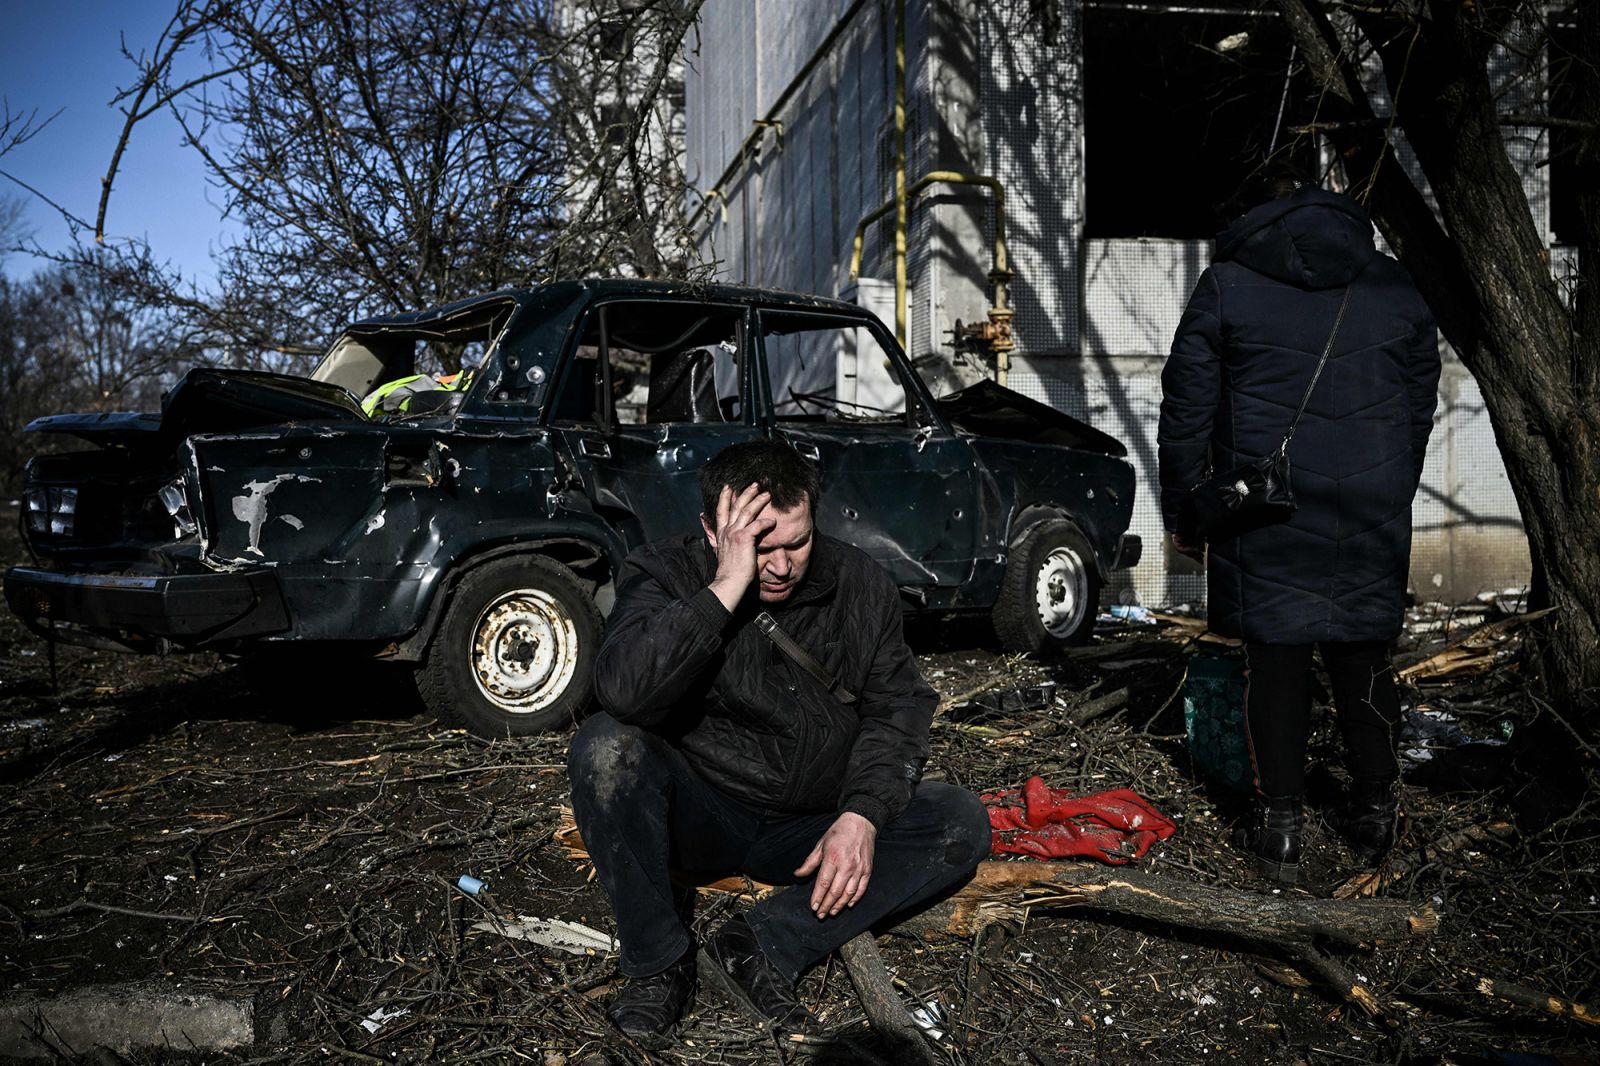 Civilian bases in Ukraine have been hit by Russian attacks